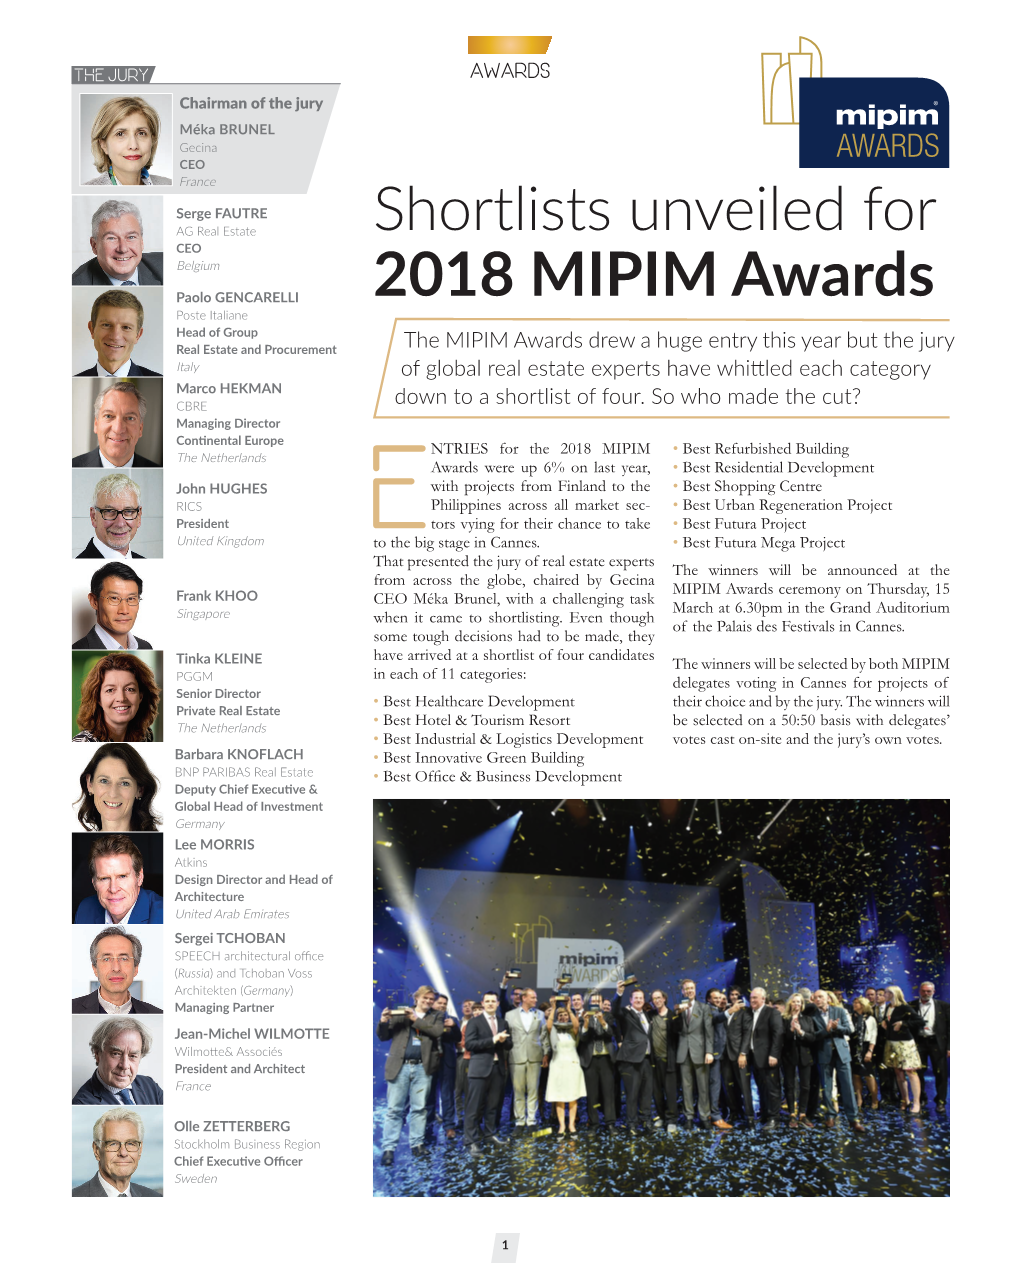 Shortlists Unveiled for 2018 MIPIM Awards